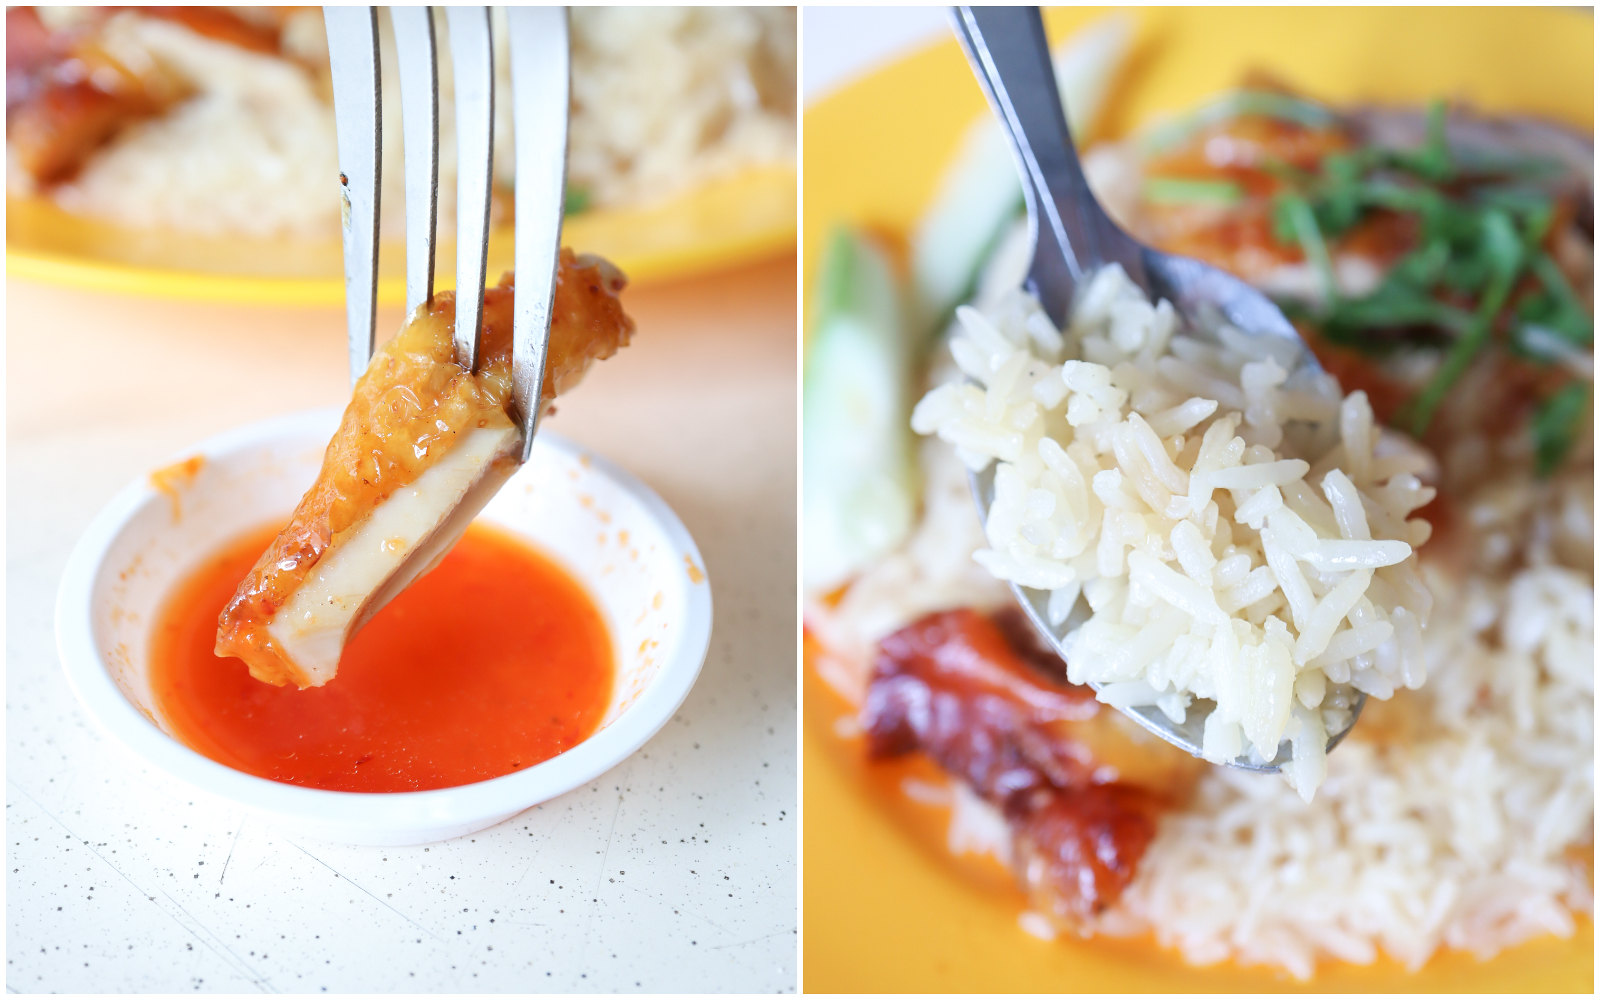 xiang ji roast chicken rice & noodles - chicken dipping and rice lifting collage